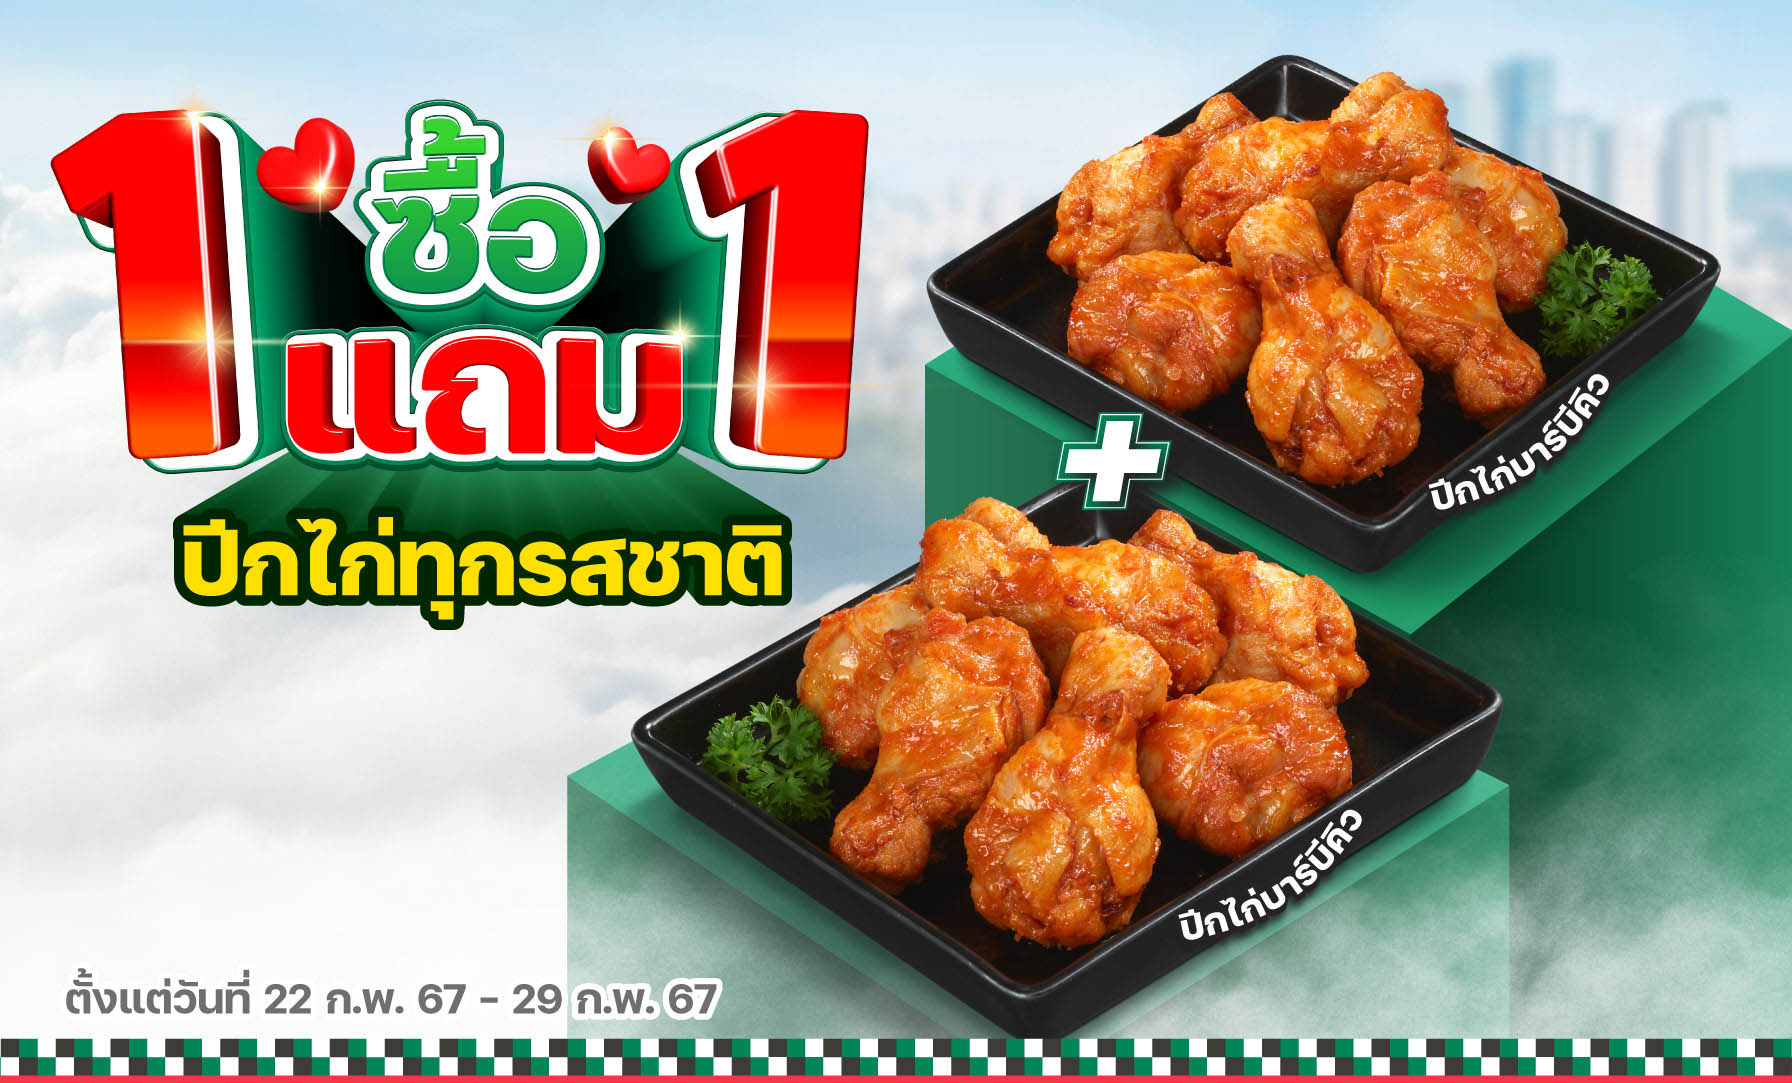 Buy 1 Get 1 Free for Chicken Wing